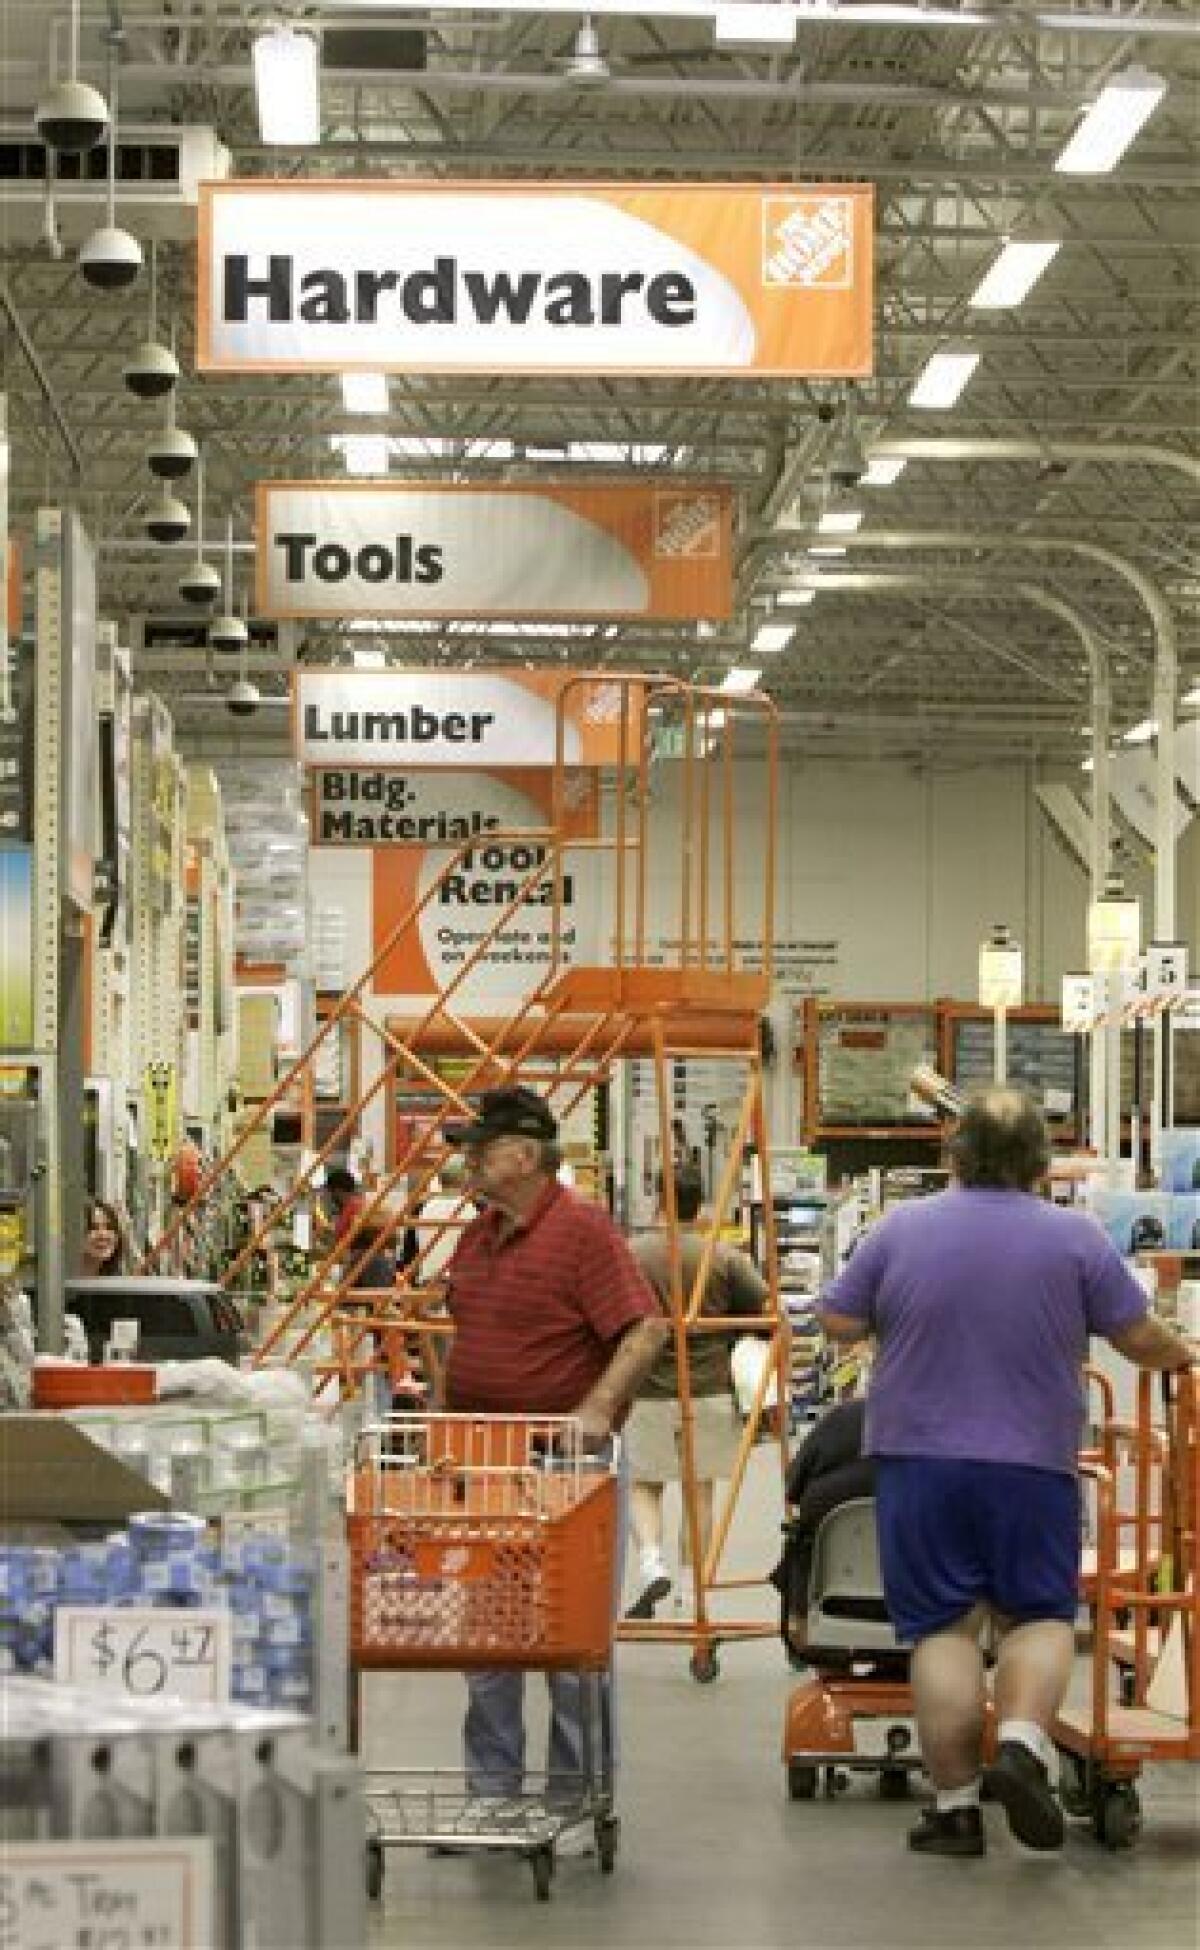 Home Depot Raises Outlook as Fewer Customers Spend More - WSJ